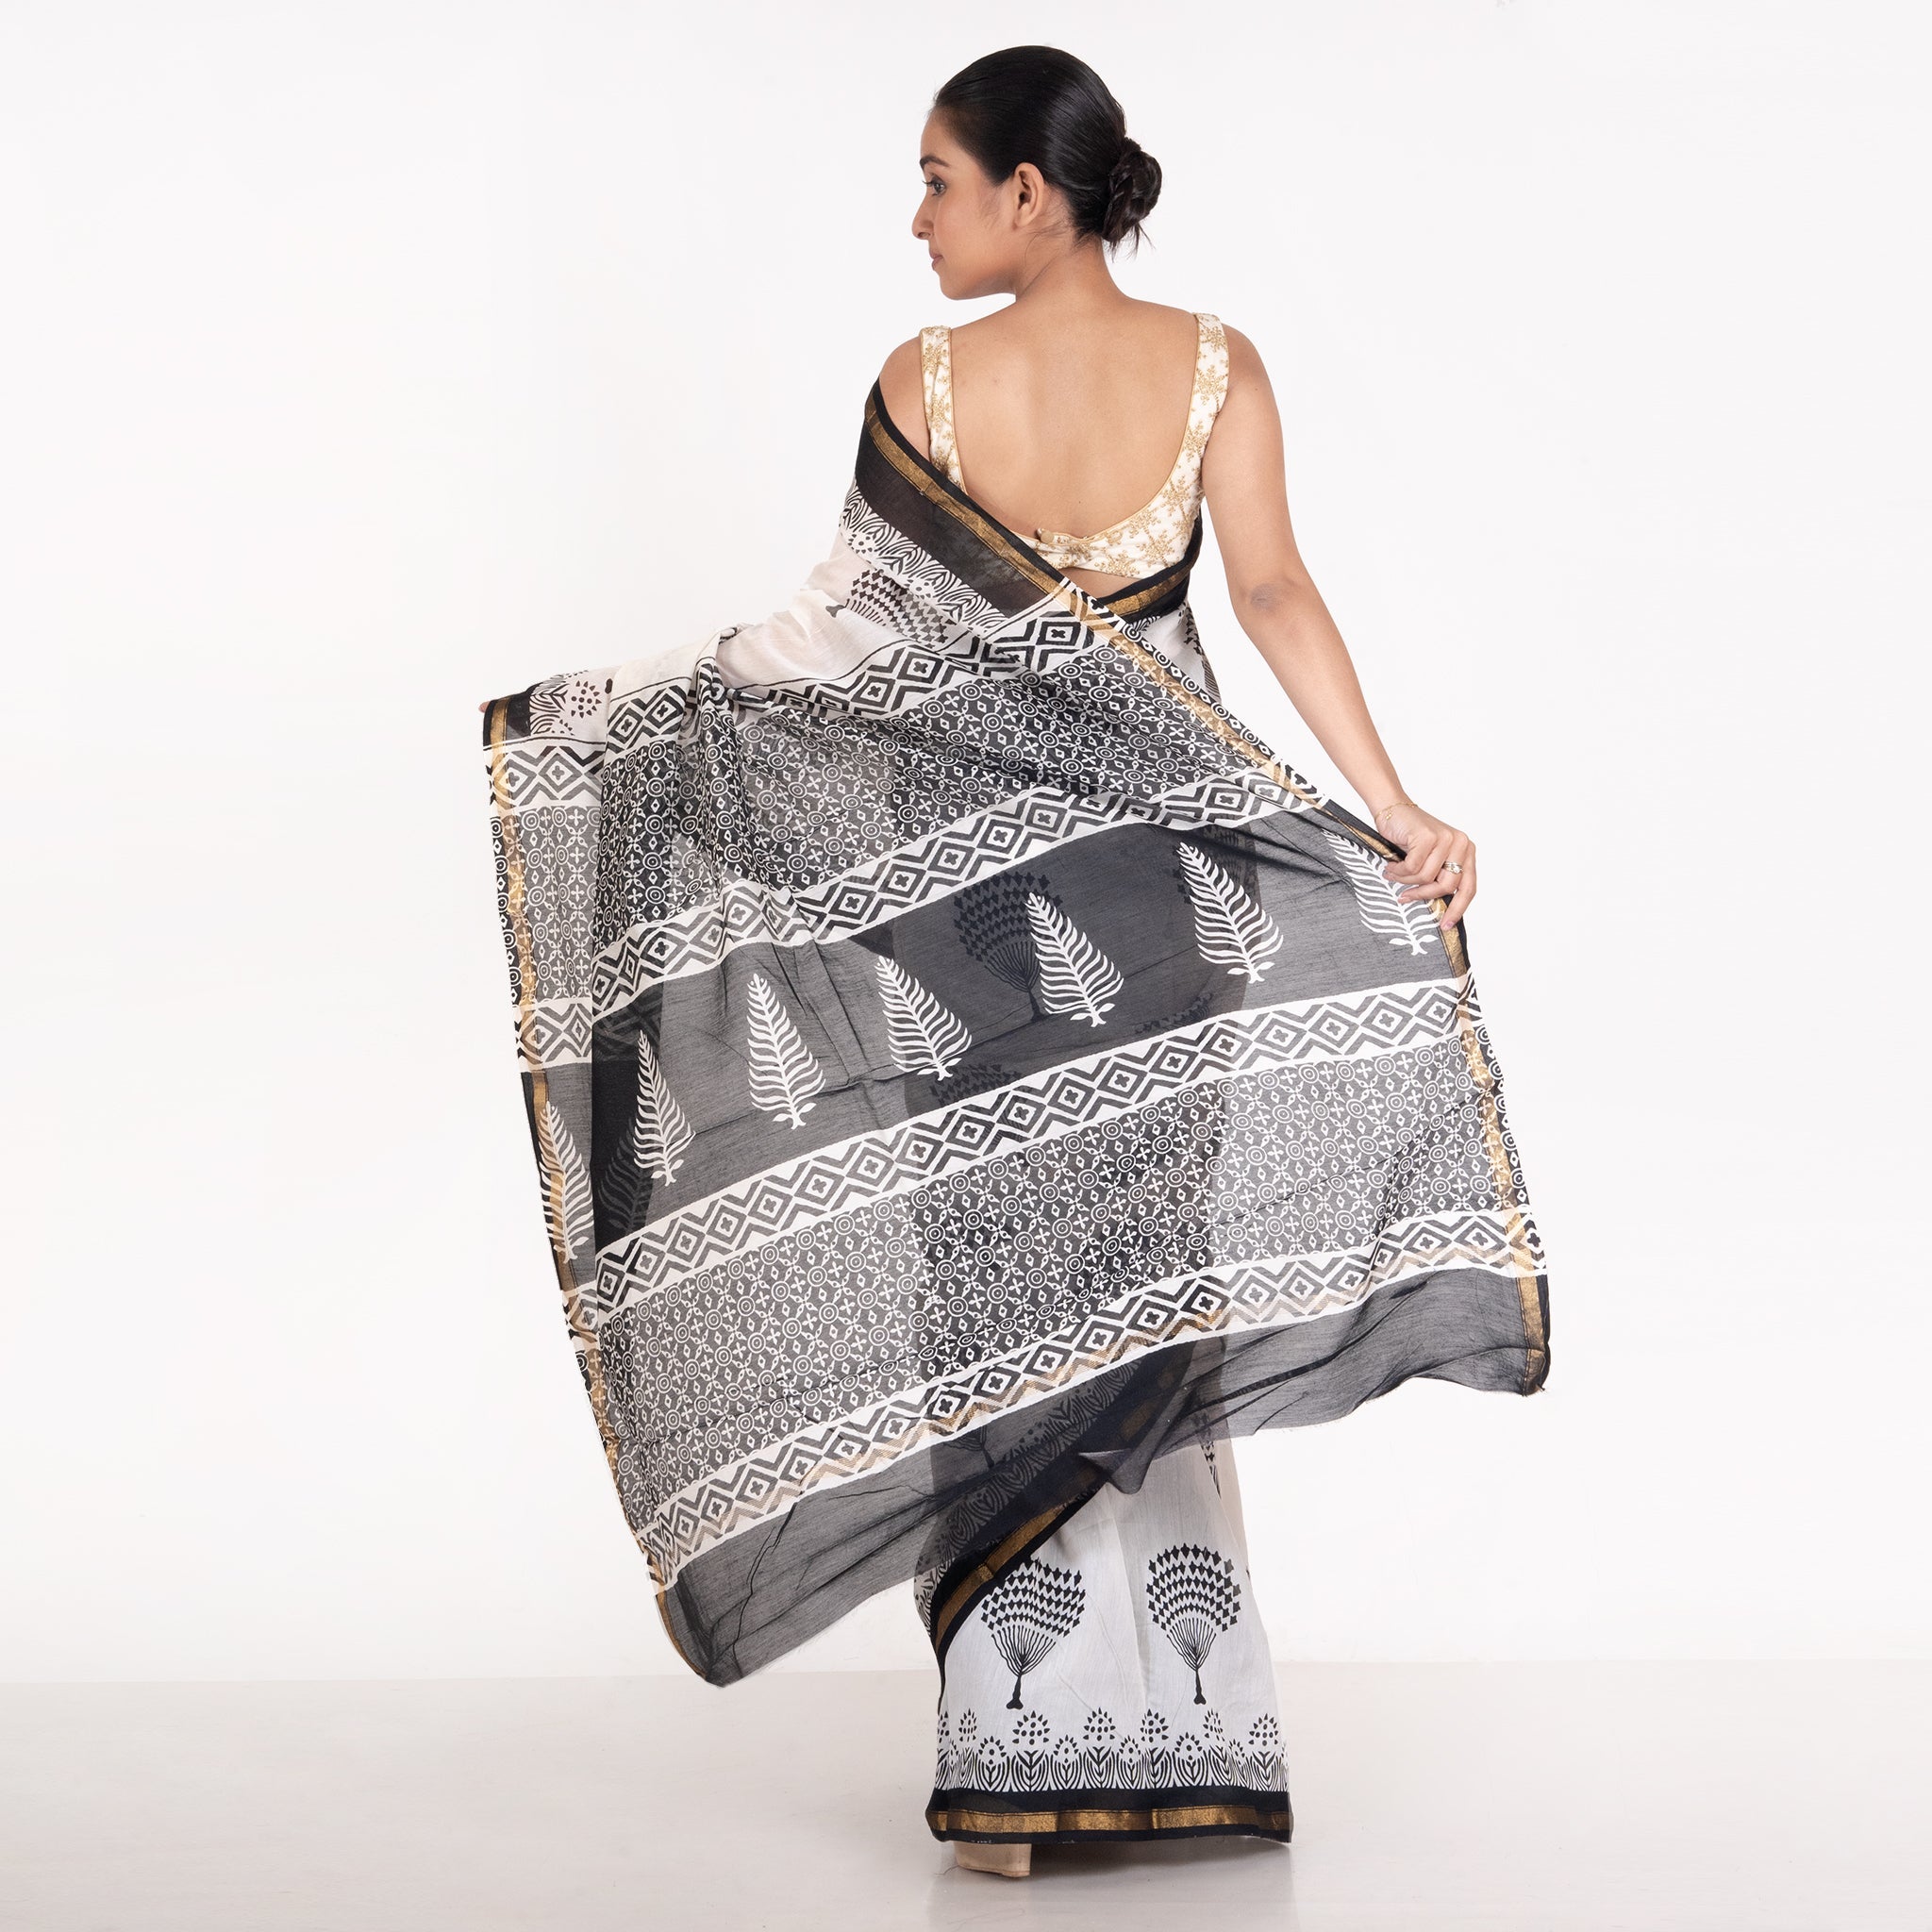 Women's Offwhite And Black Cotton Silk Chanderi Saree With Tree Motifs - Boveee